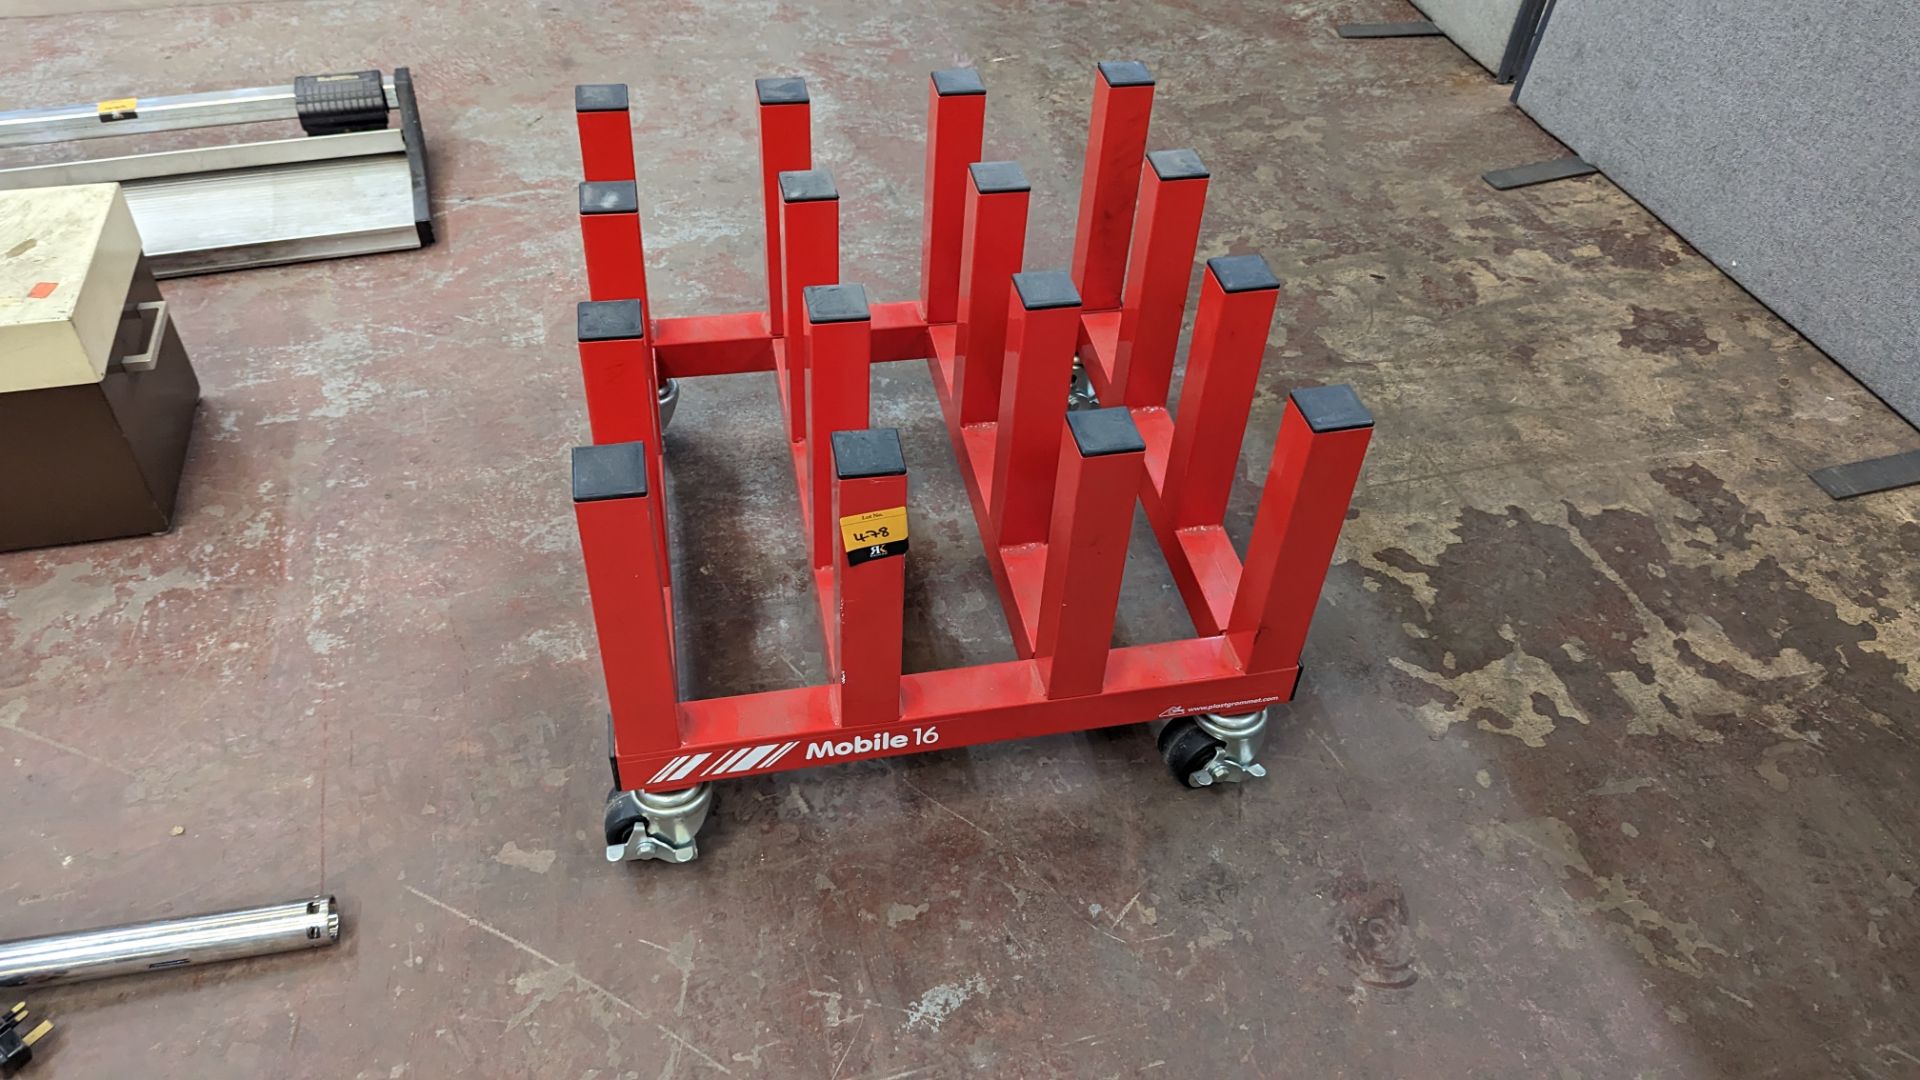 Mobile 16 red materials handling trolley with 16 "stumps" - Image 2 of 5